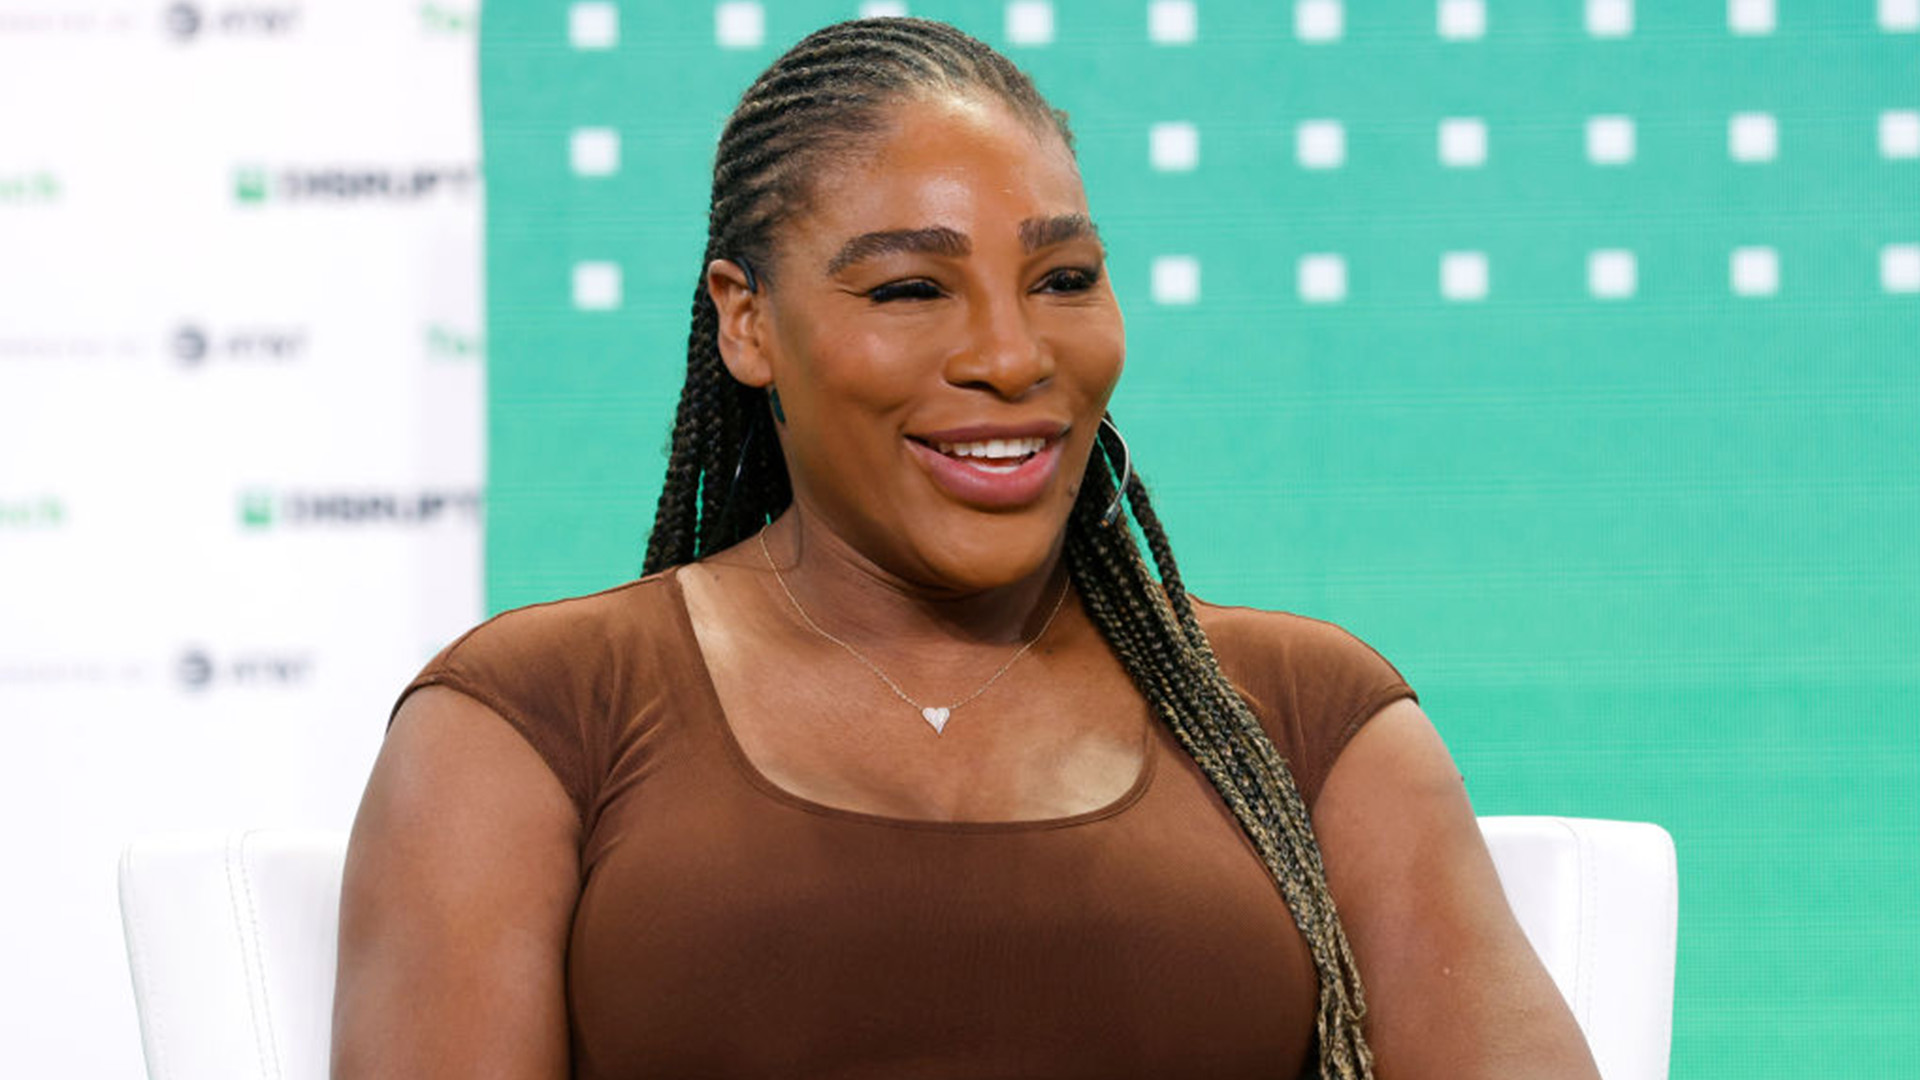 Serena Williams Reveals The 'Amazing Company' She Regrets Turning Down The Most